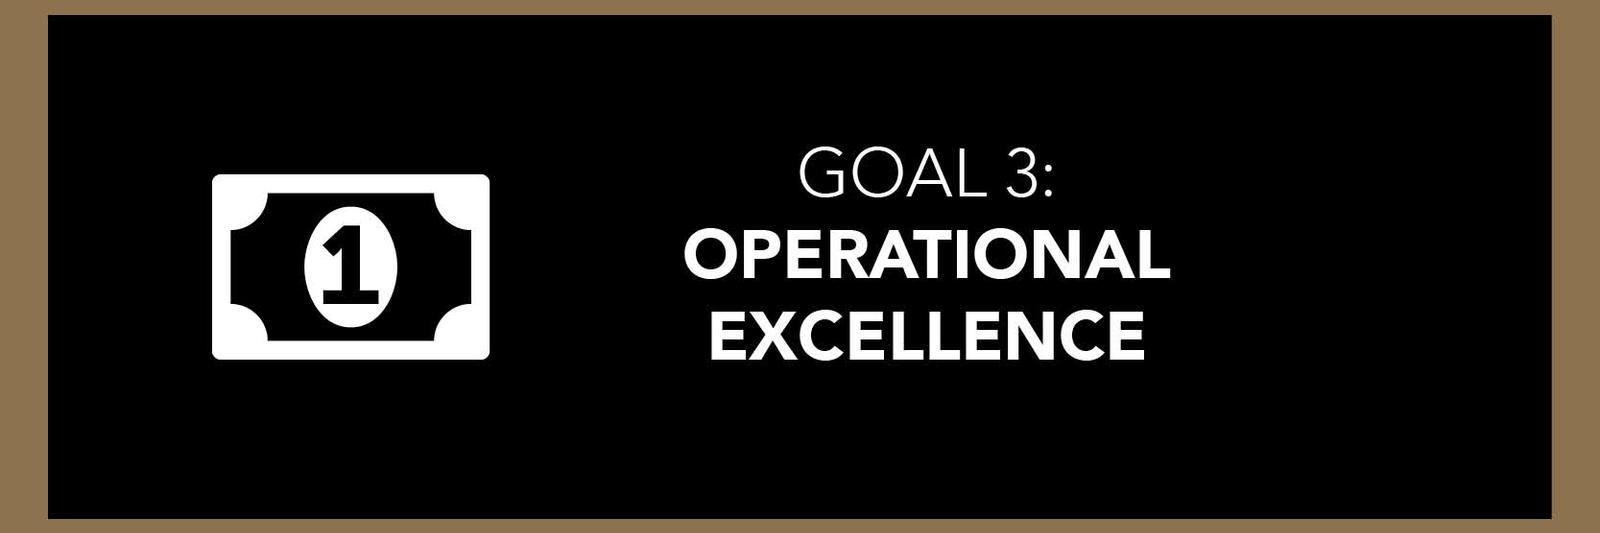 Goal 3 Operational Excellence